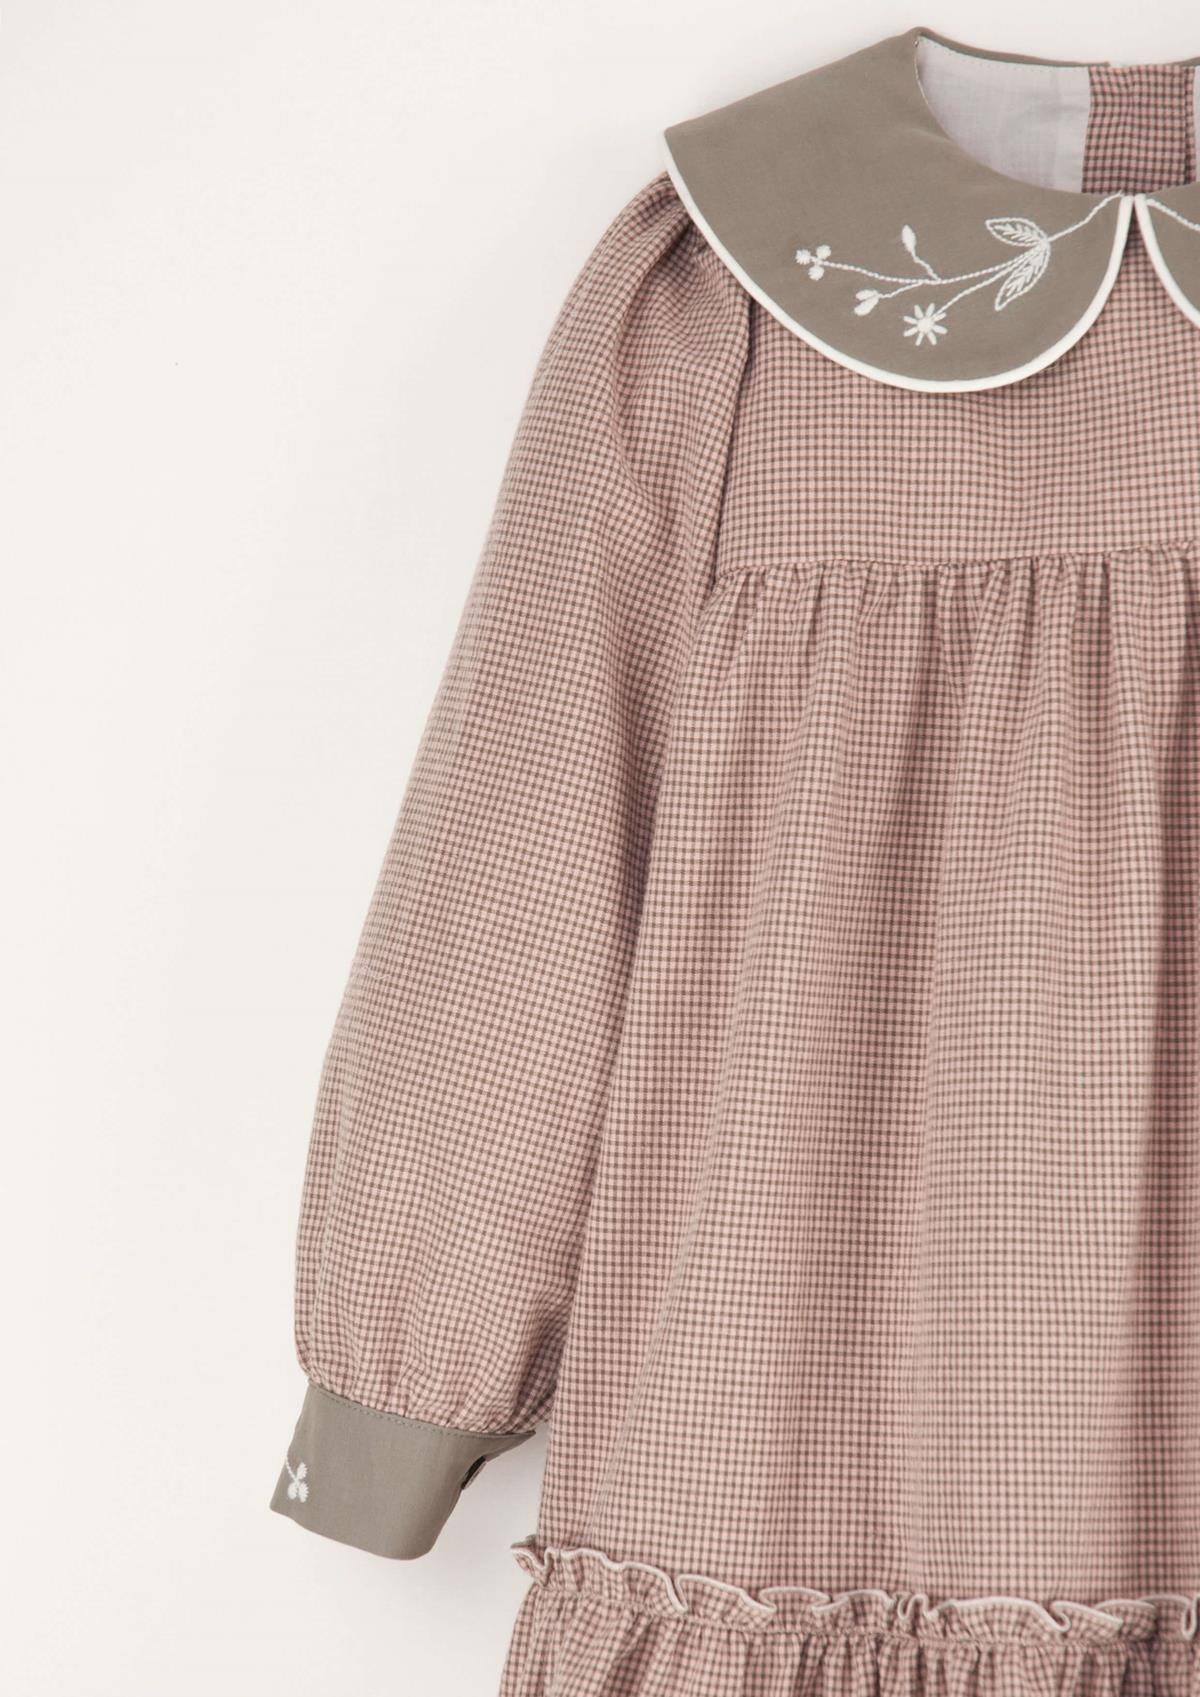 Mod.33.1 Pink gingham dress with embroidered collar | AW23.24 Mod.33.1 Pink gingham dress with embroidered collar